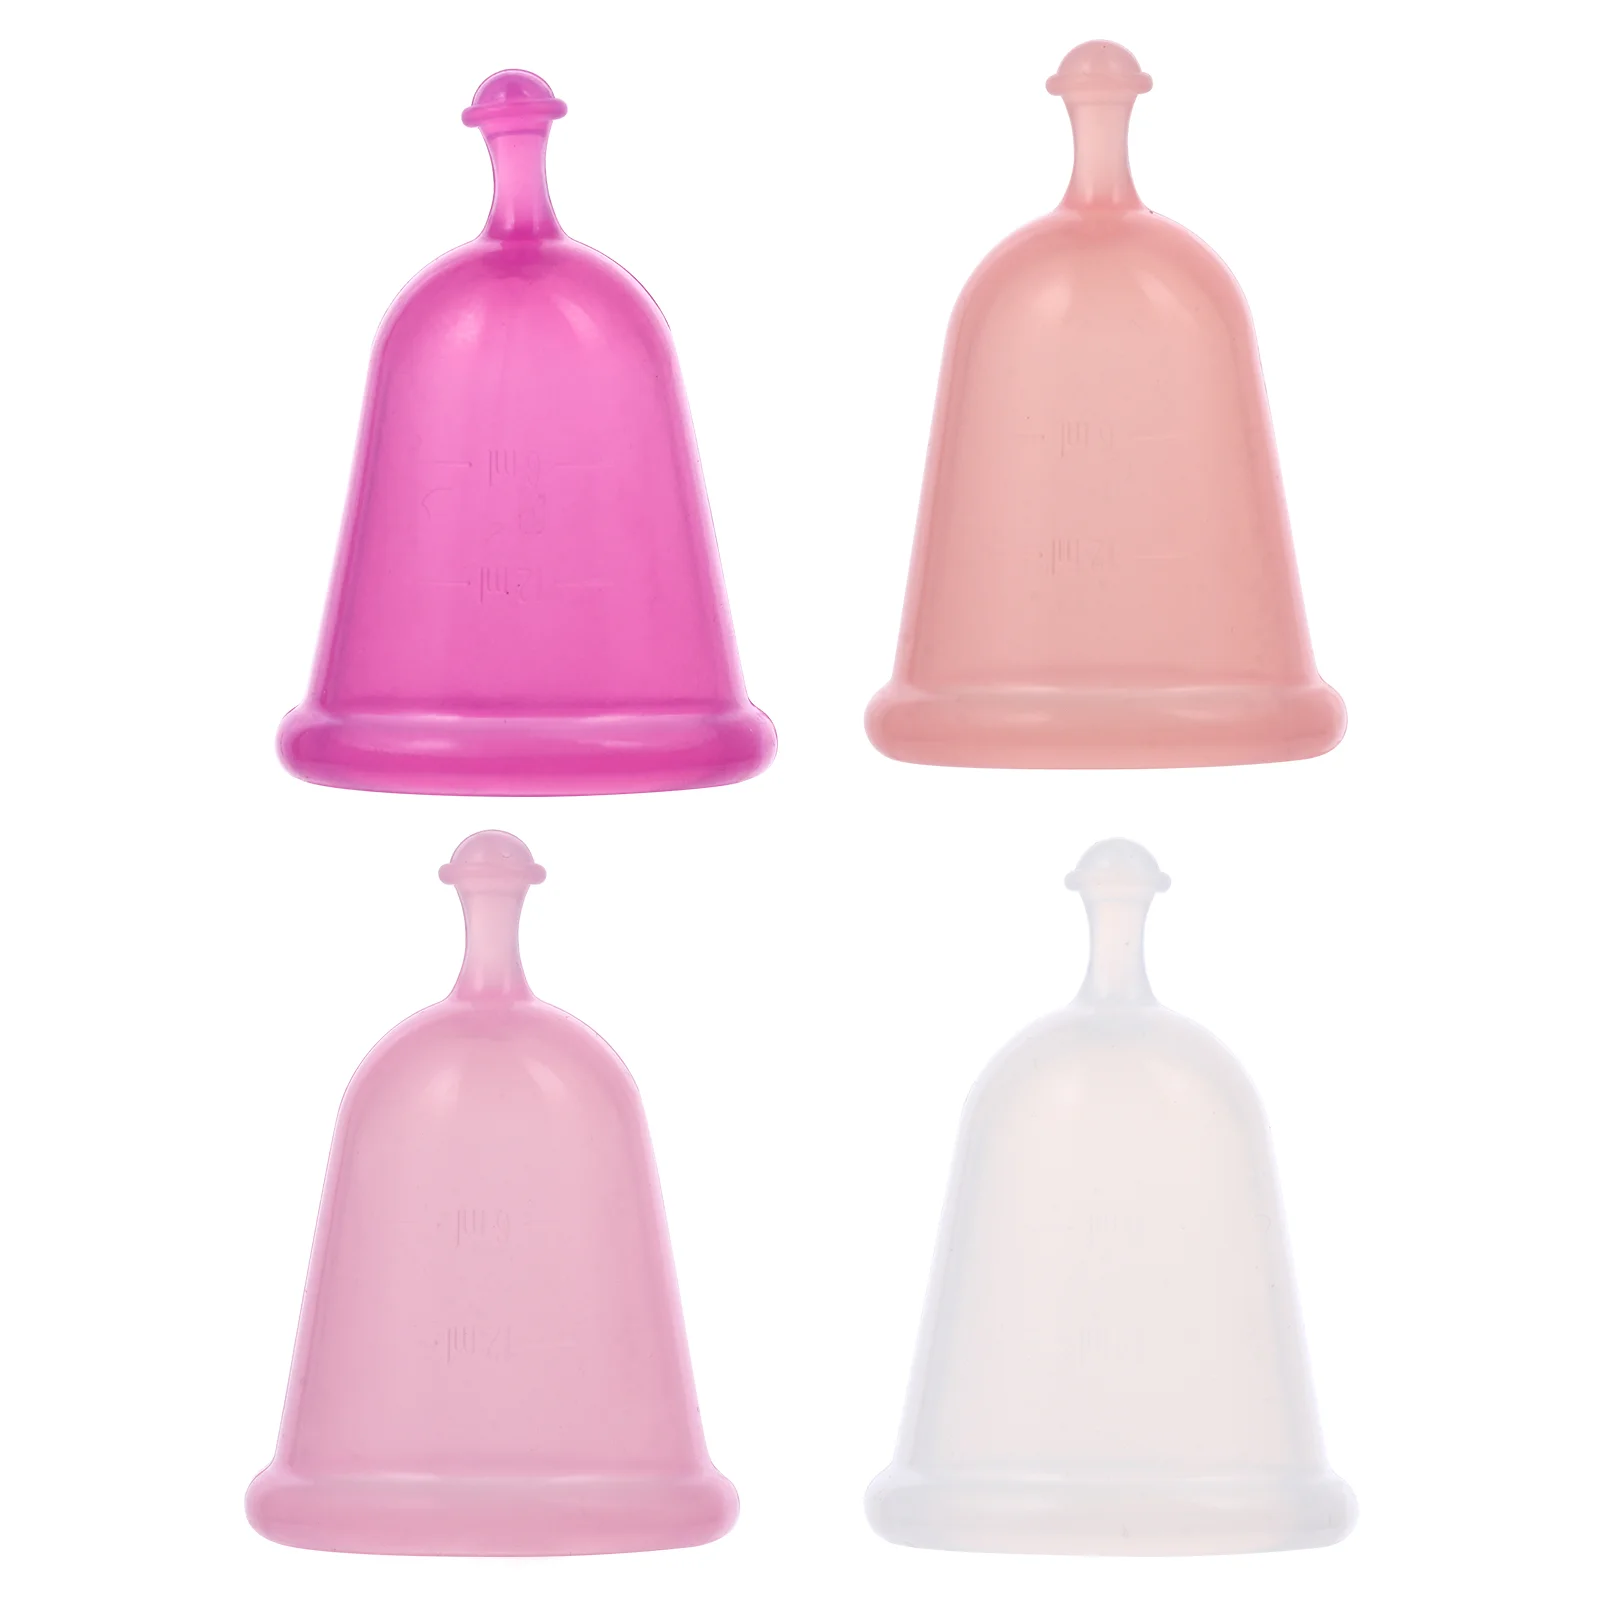 

4Pcs Period Cup Flexible Soft Silicone Menstruation Supplies Pad Alternative Sanitary Cup